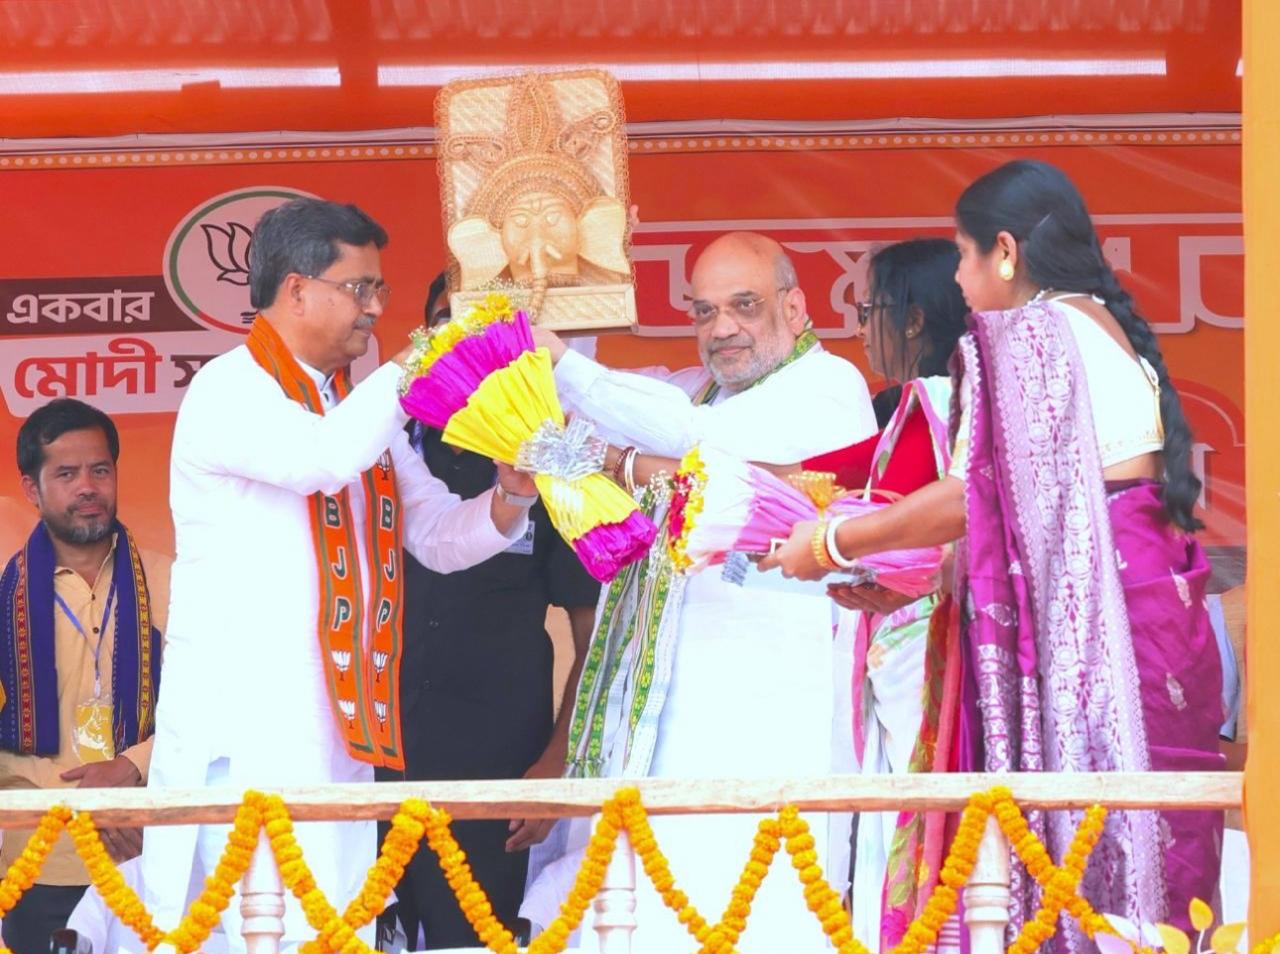 Leftists have left Tripura empty-handed in the name of development: Amit Shah